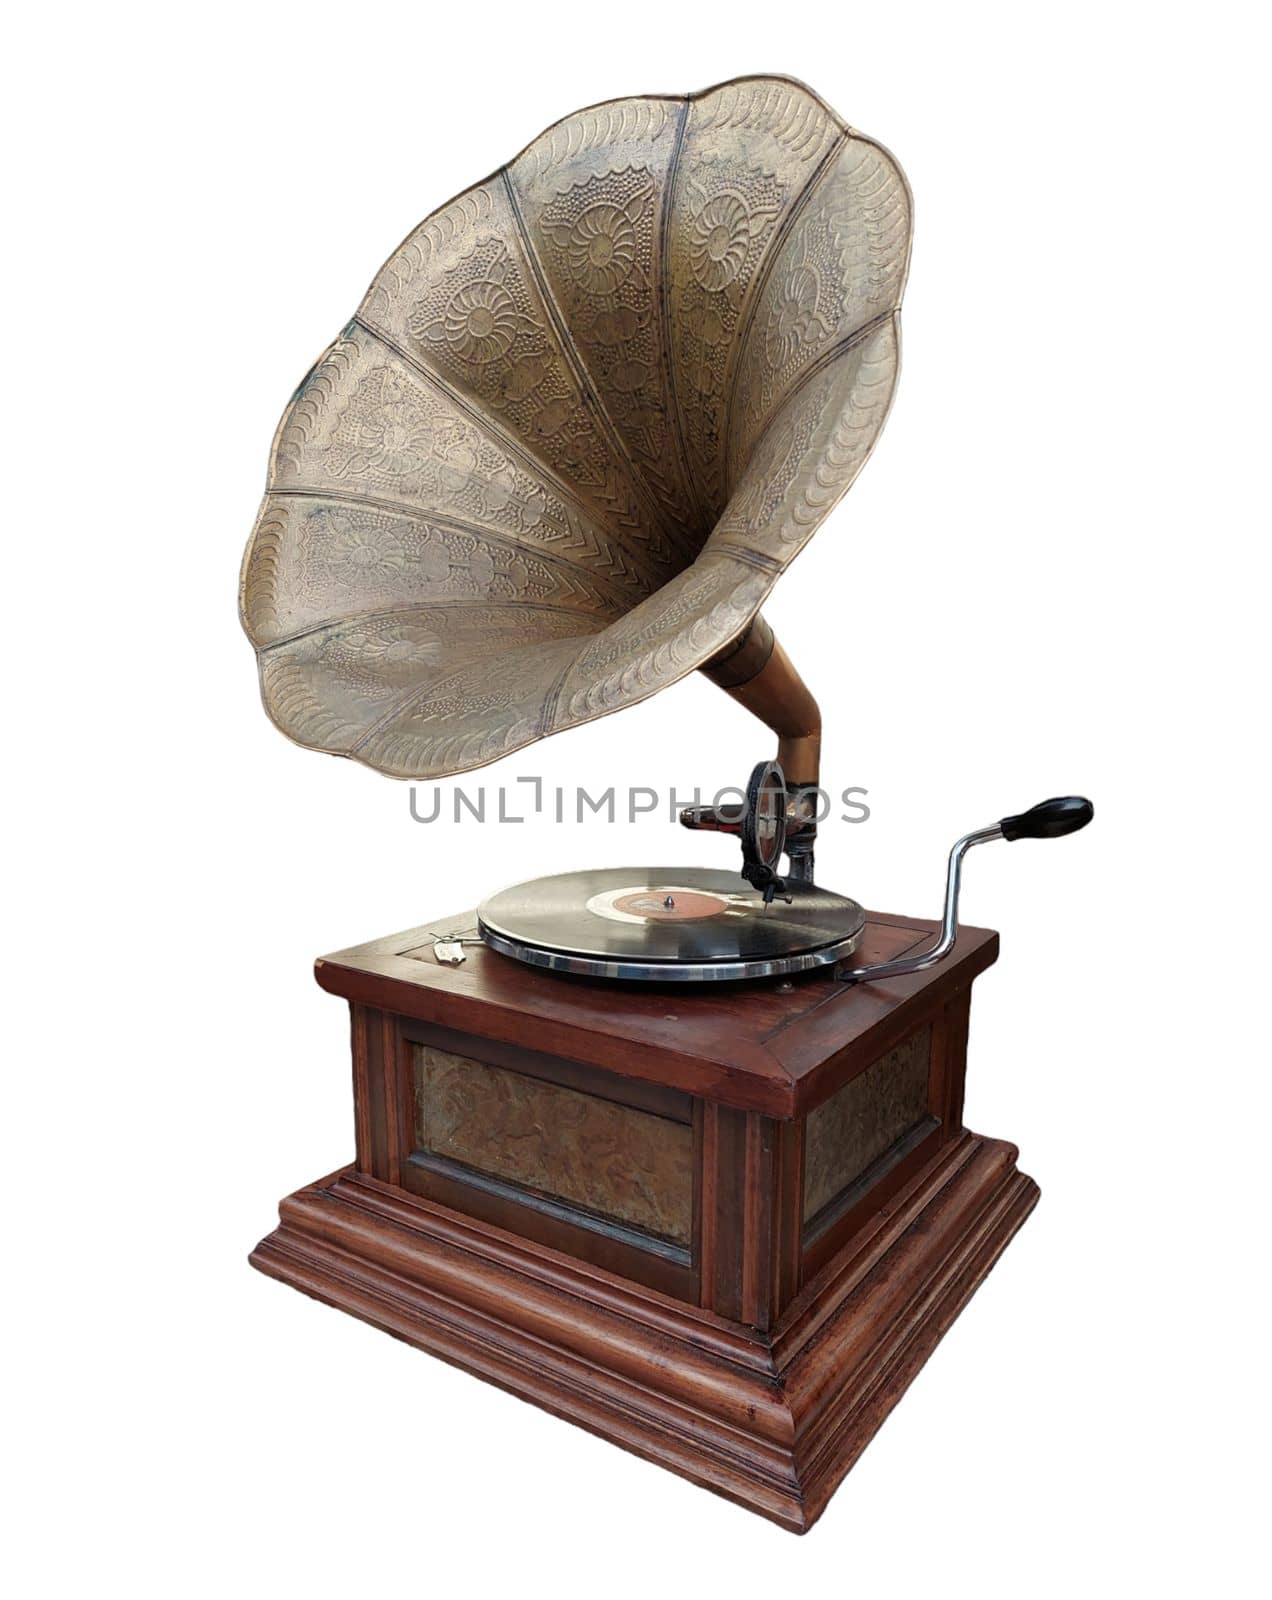 old retro worn gramophone isolated on white background. by gallofoto